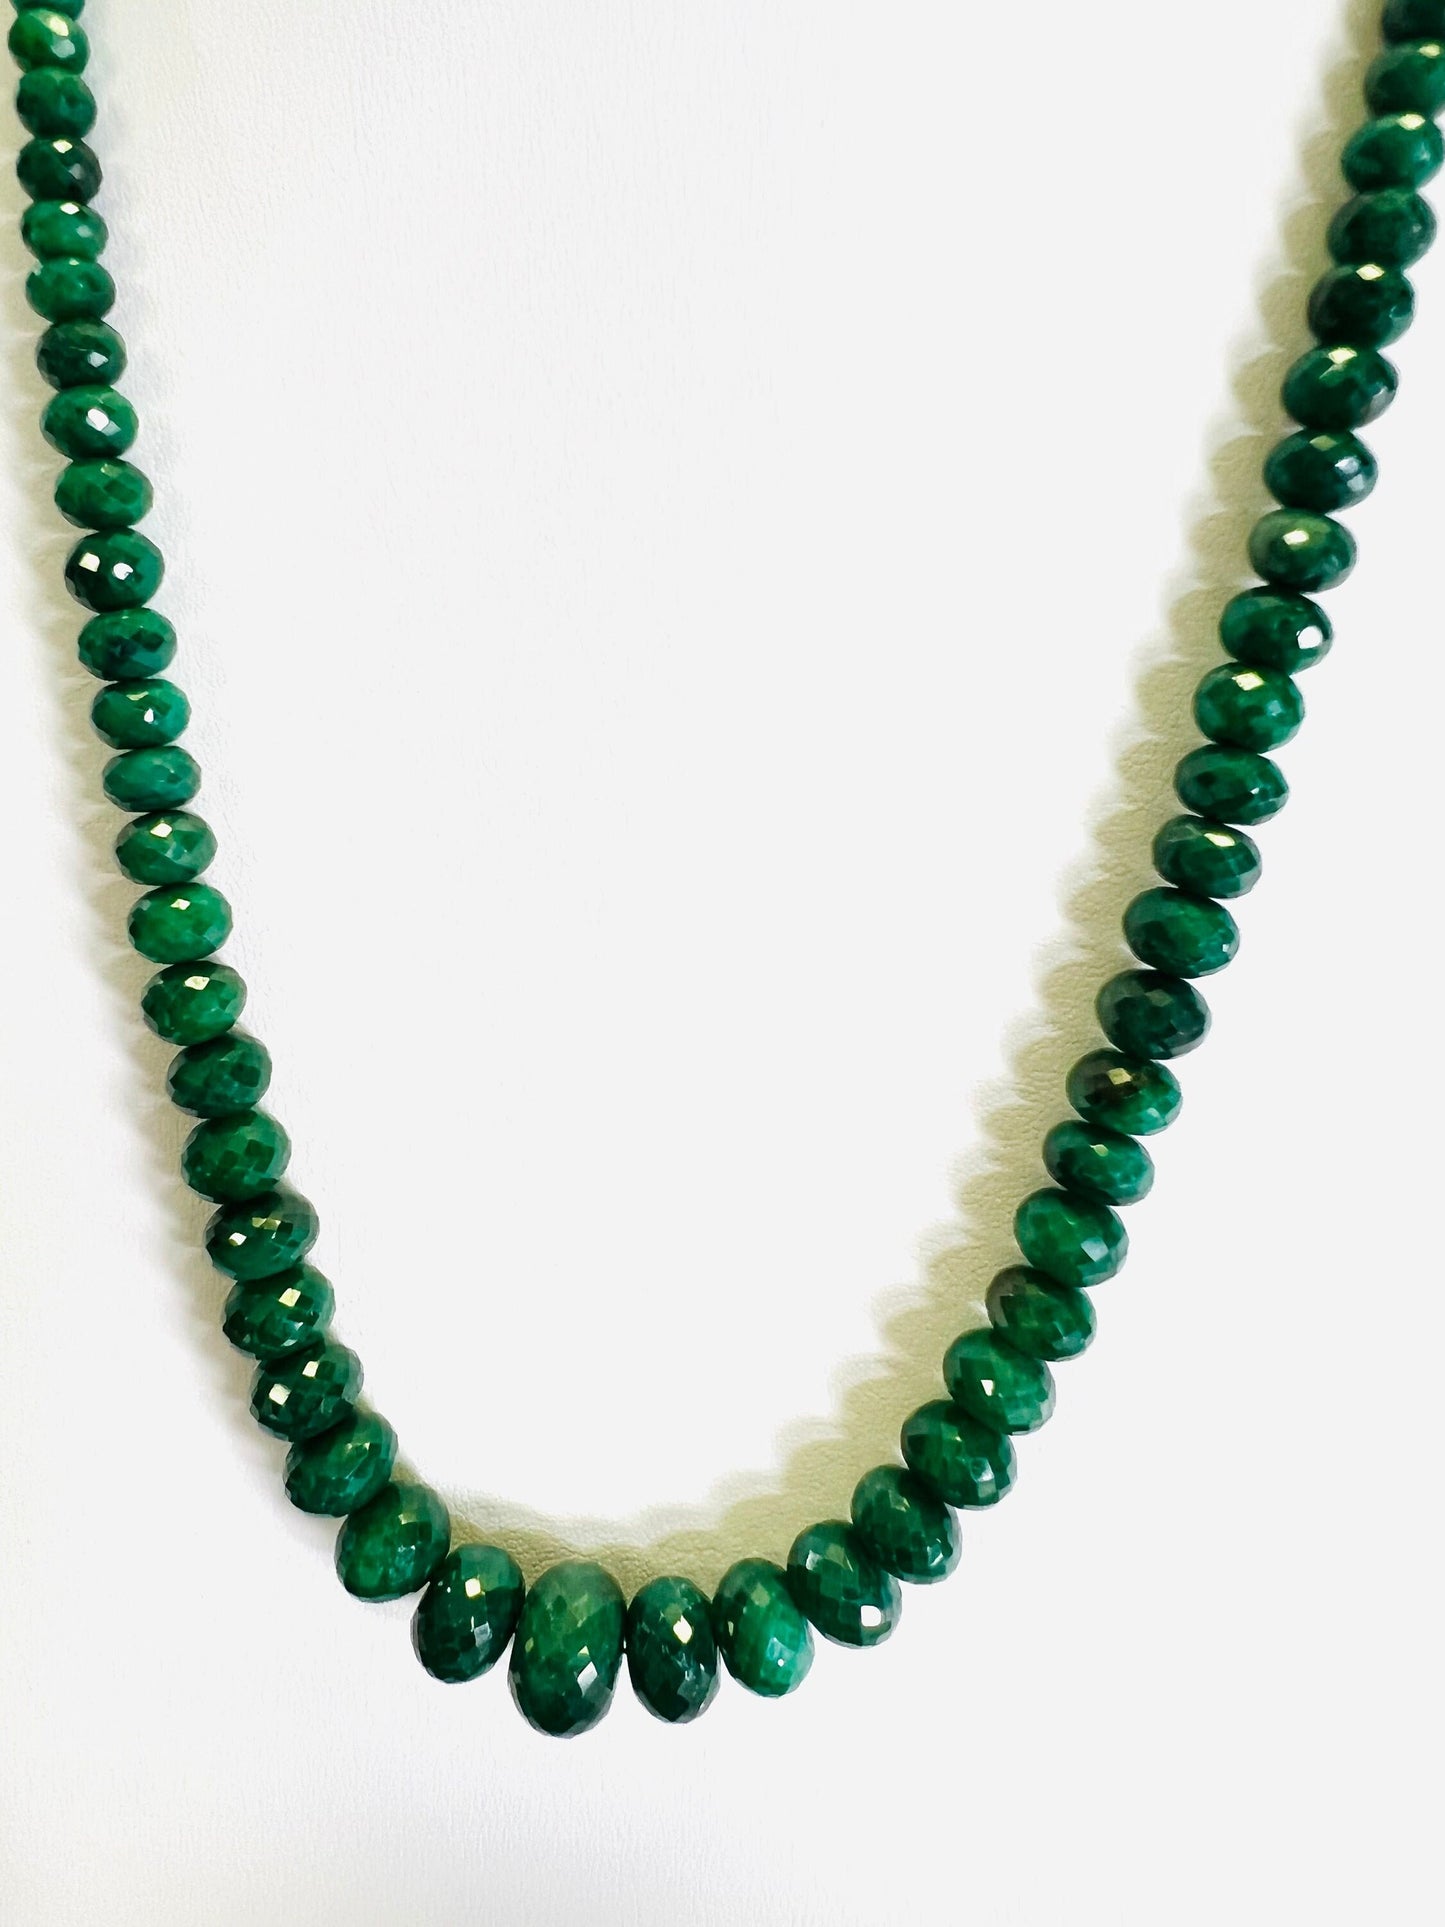 Genuine Zambian Emerald Dark green 7-16mm large Faceted Roundel Gemstone 16&quot; Necklace with 9&quot; Adjustable thread,May Birthstone,Gift 471 ct